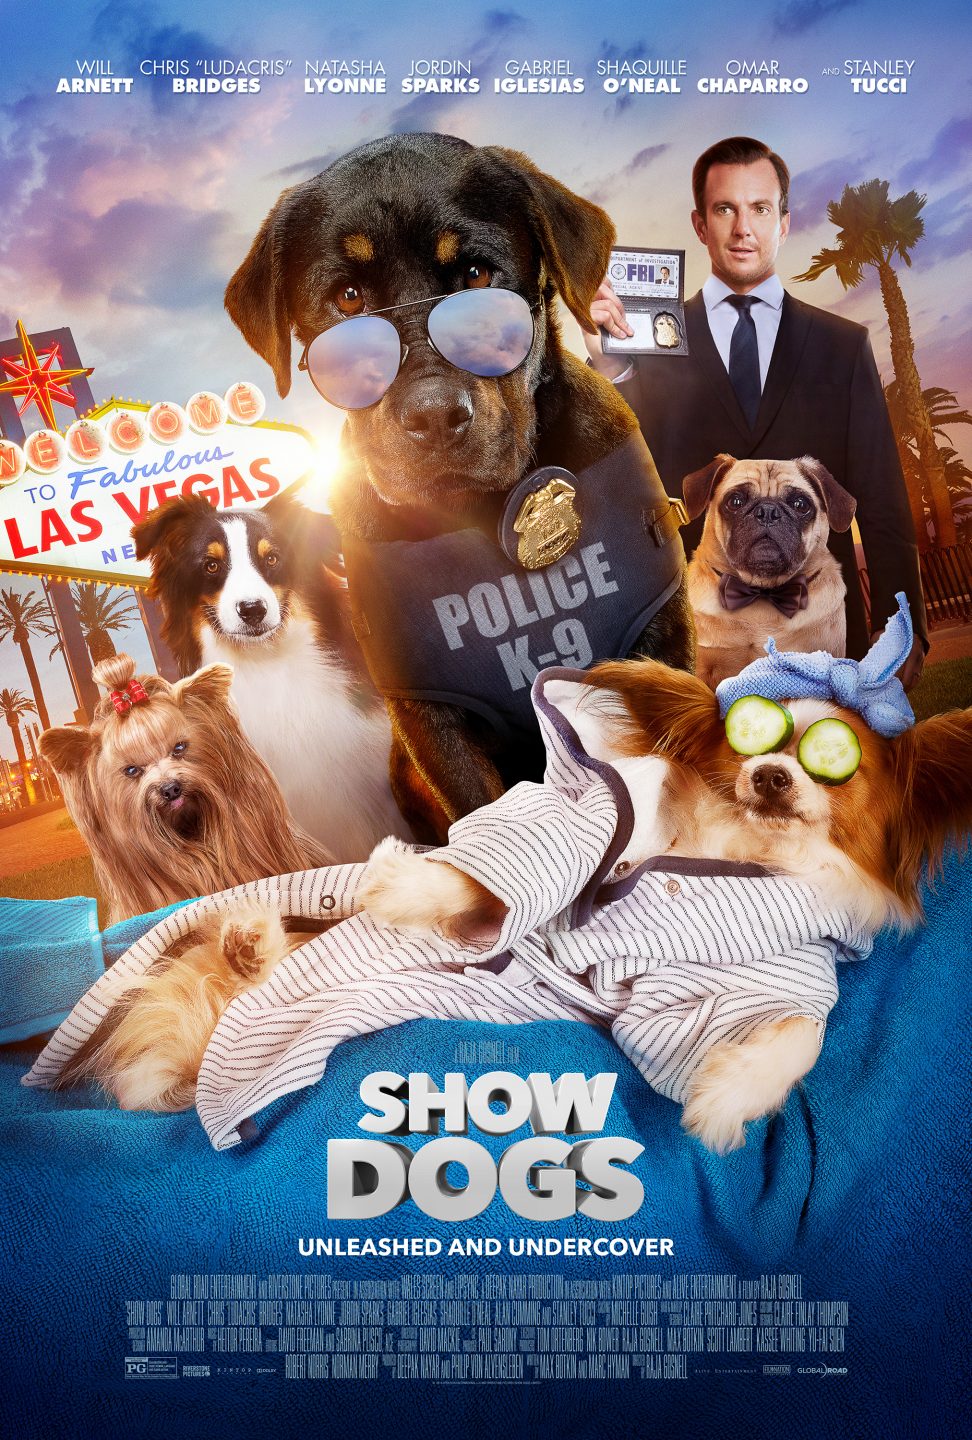 Show Dogs poster (Open Road Films)